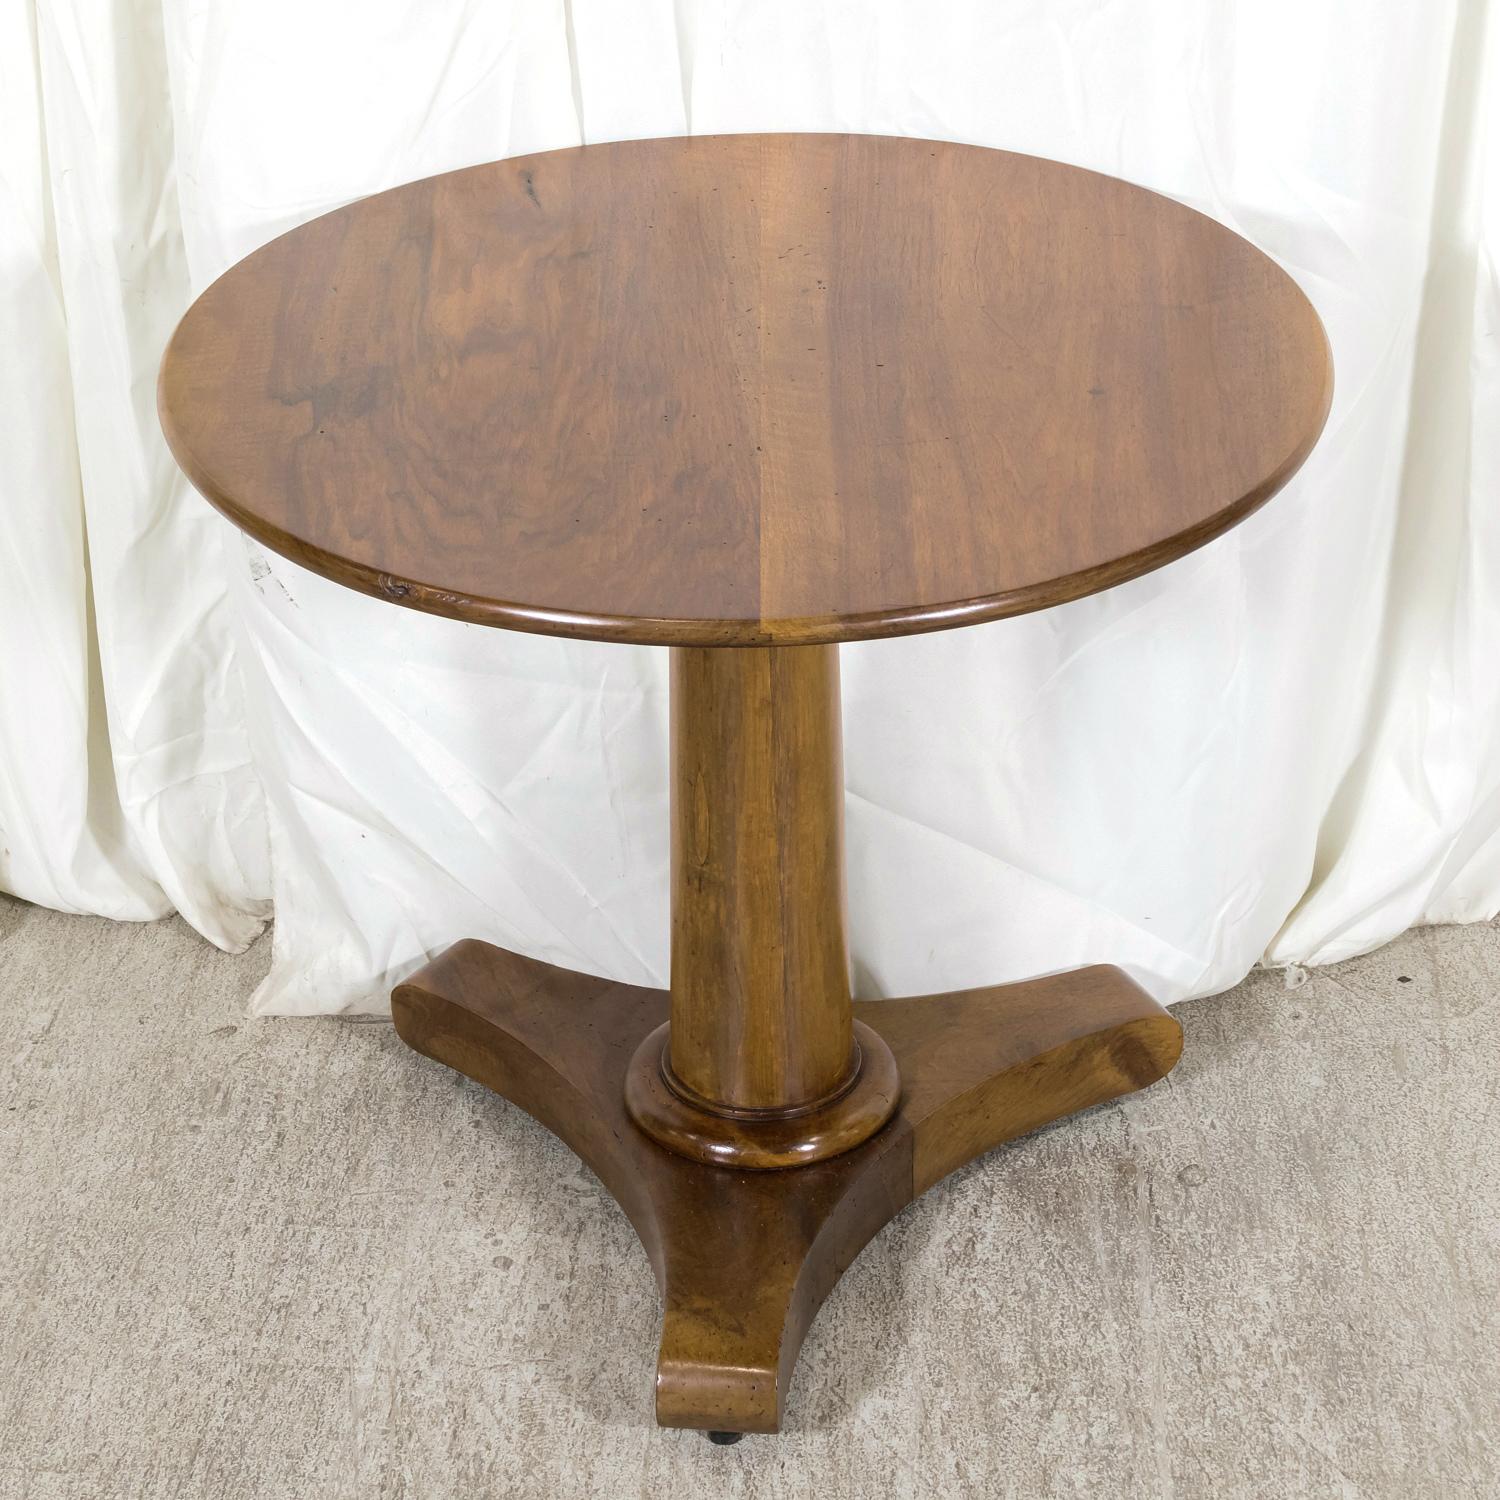 19th Century French Empire Period Solid Walnut Tilt Top Gueridon Side Table 14